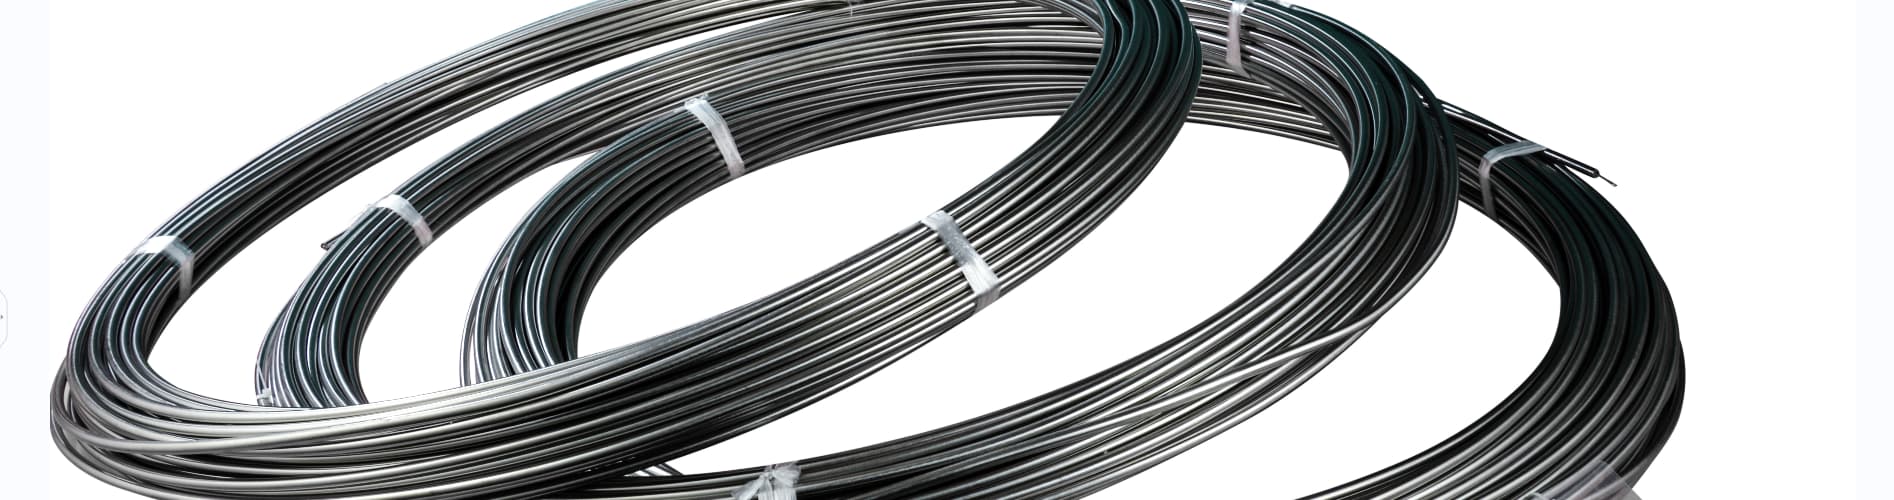 Mineral insulated thermocouple cable